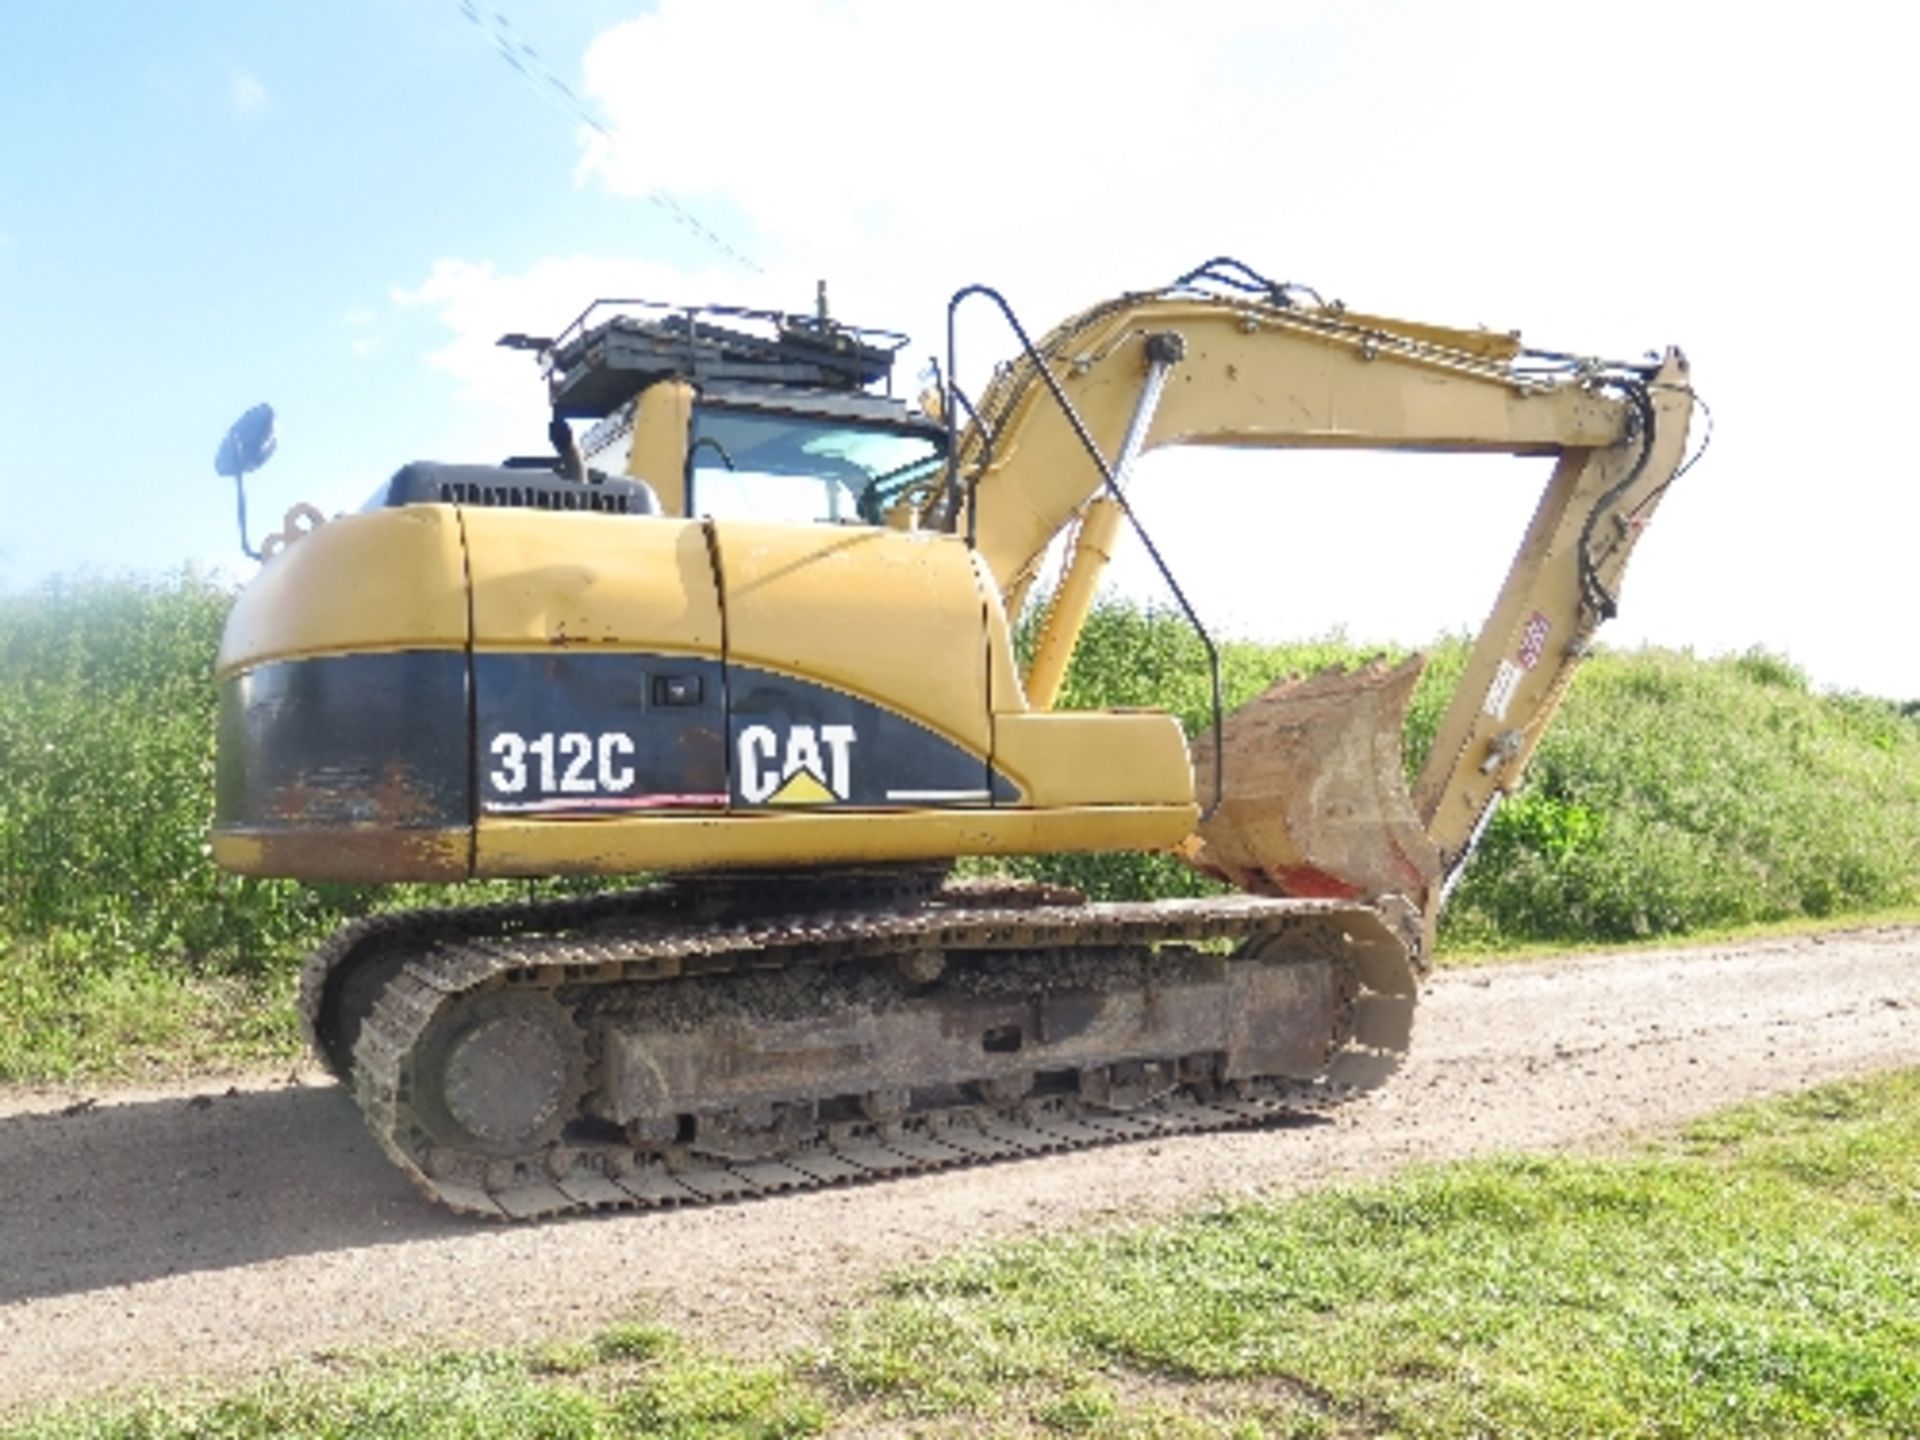 Caterpillar 312C excavator 3164 hrs 2006 145525ALL LOTS are SOLD AS SEEN WITHOUT WARRANTY expressed,